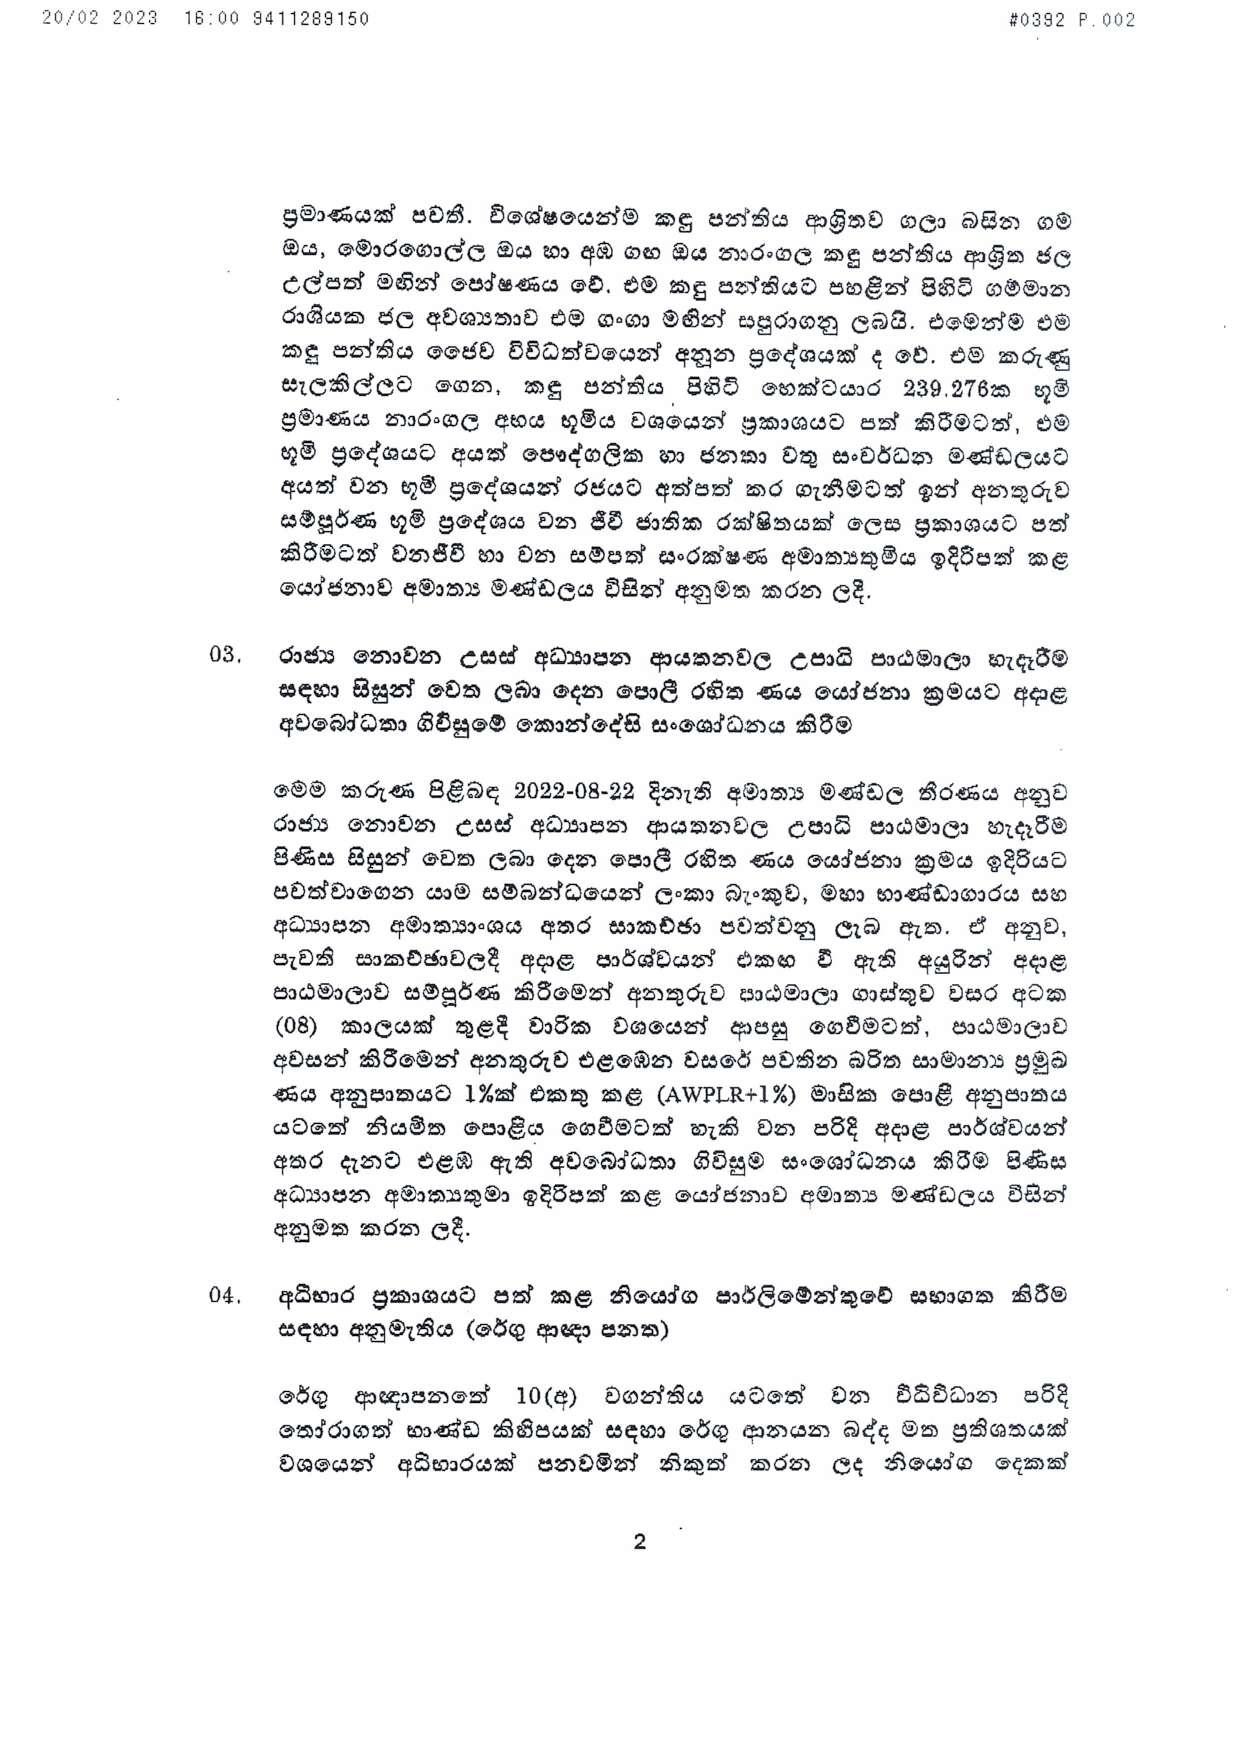 Cabinet Decisions on 20.02.2023 page 002